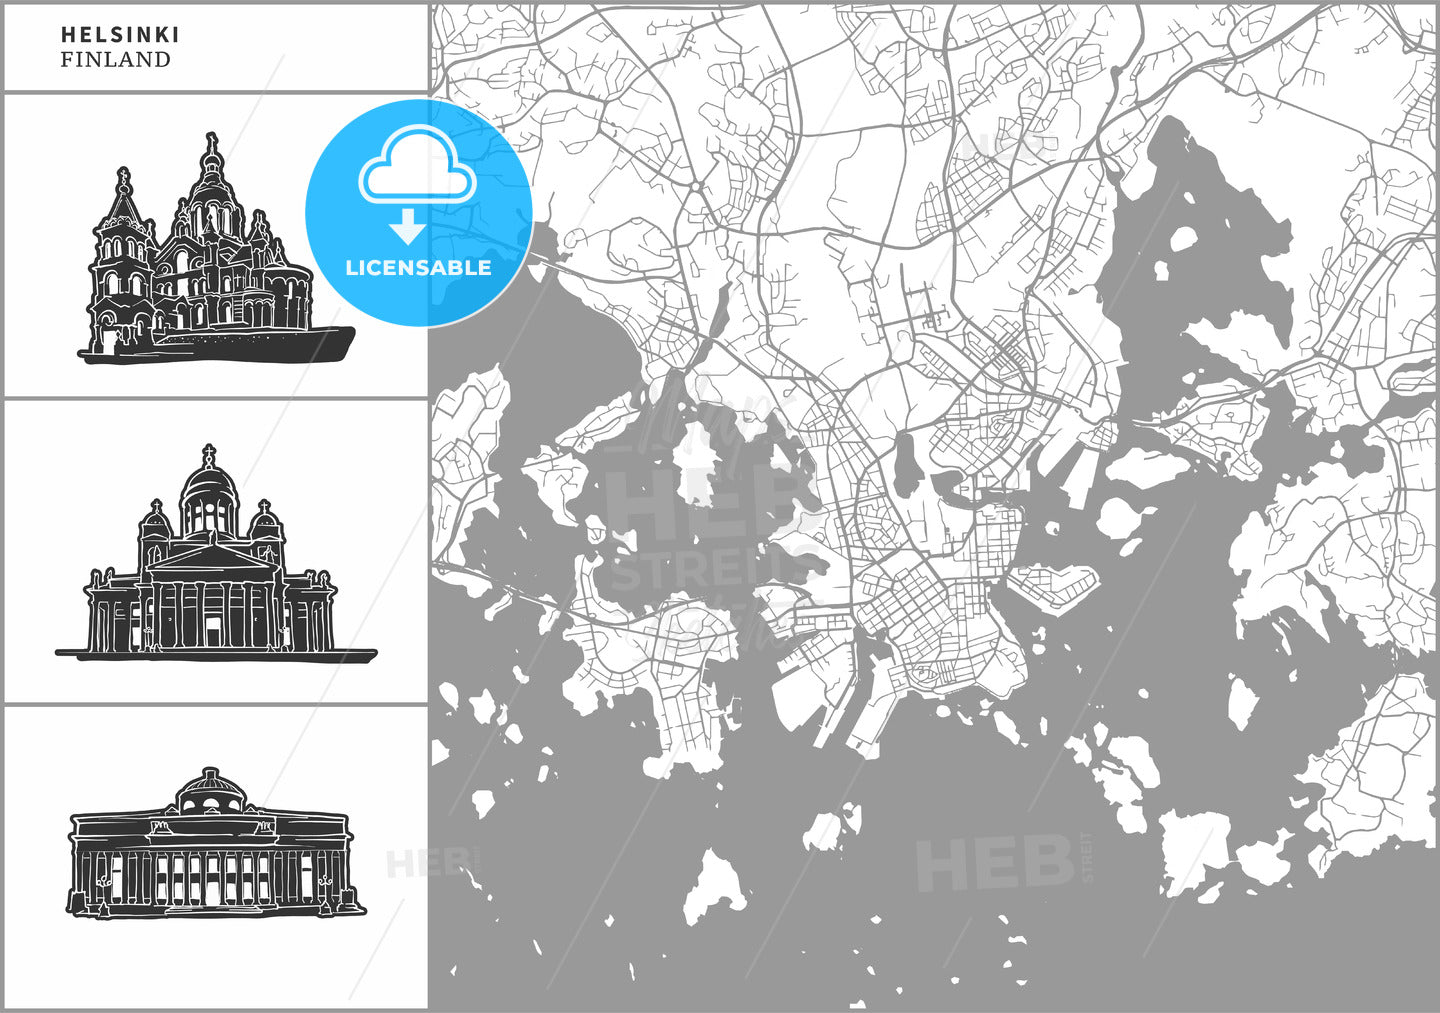 Helsinki city map with hand-drawn architecture icons